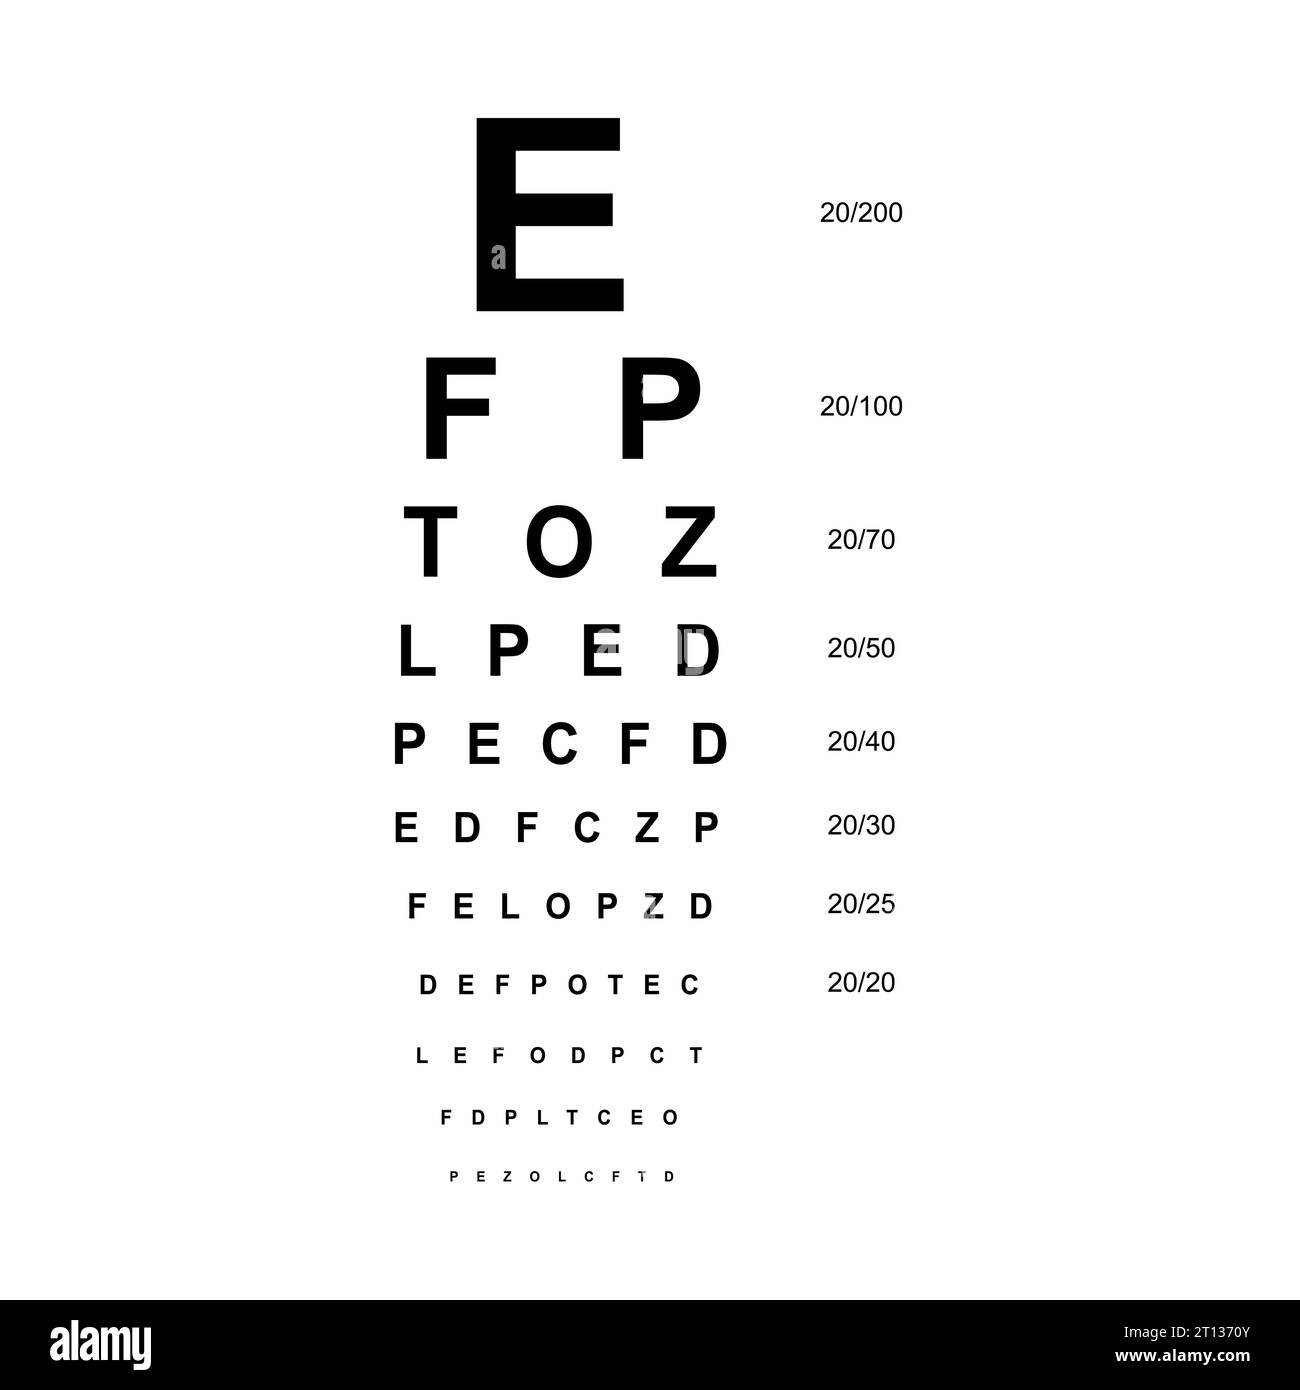 https://c8.alamy.com/comp/2T1370Y/snellen-chart-eye-test-medical-illustration-line-vector-sketch-style-outline-isolated-on-white-background-vision-board-optometrist-ophthalmic-test-for-visual-examination-checking-optical-glasses-2T1370Y.jpg